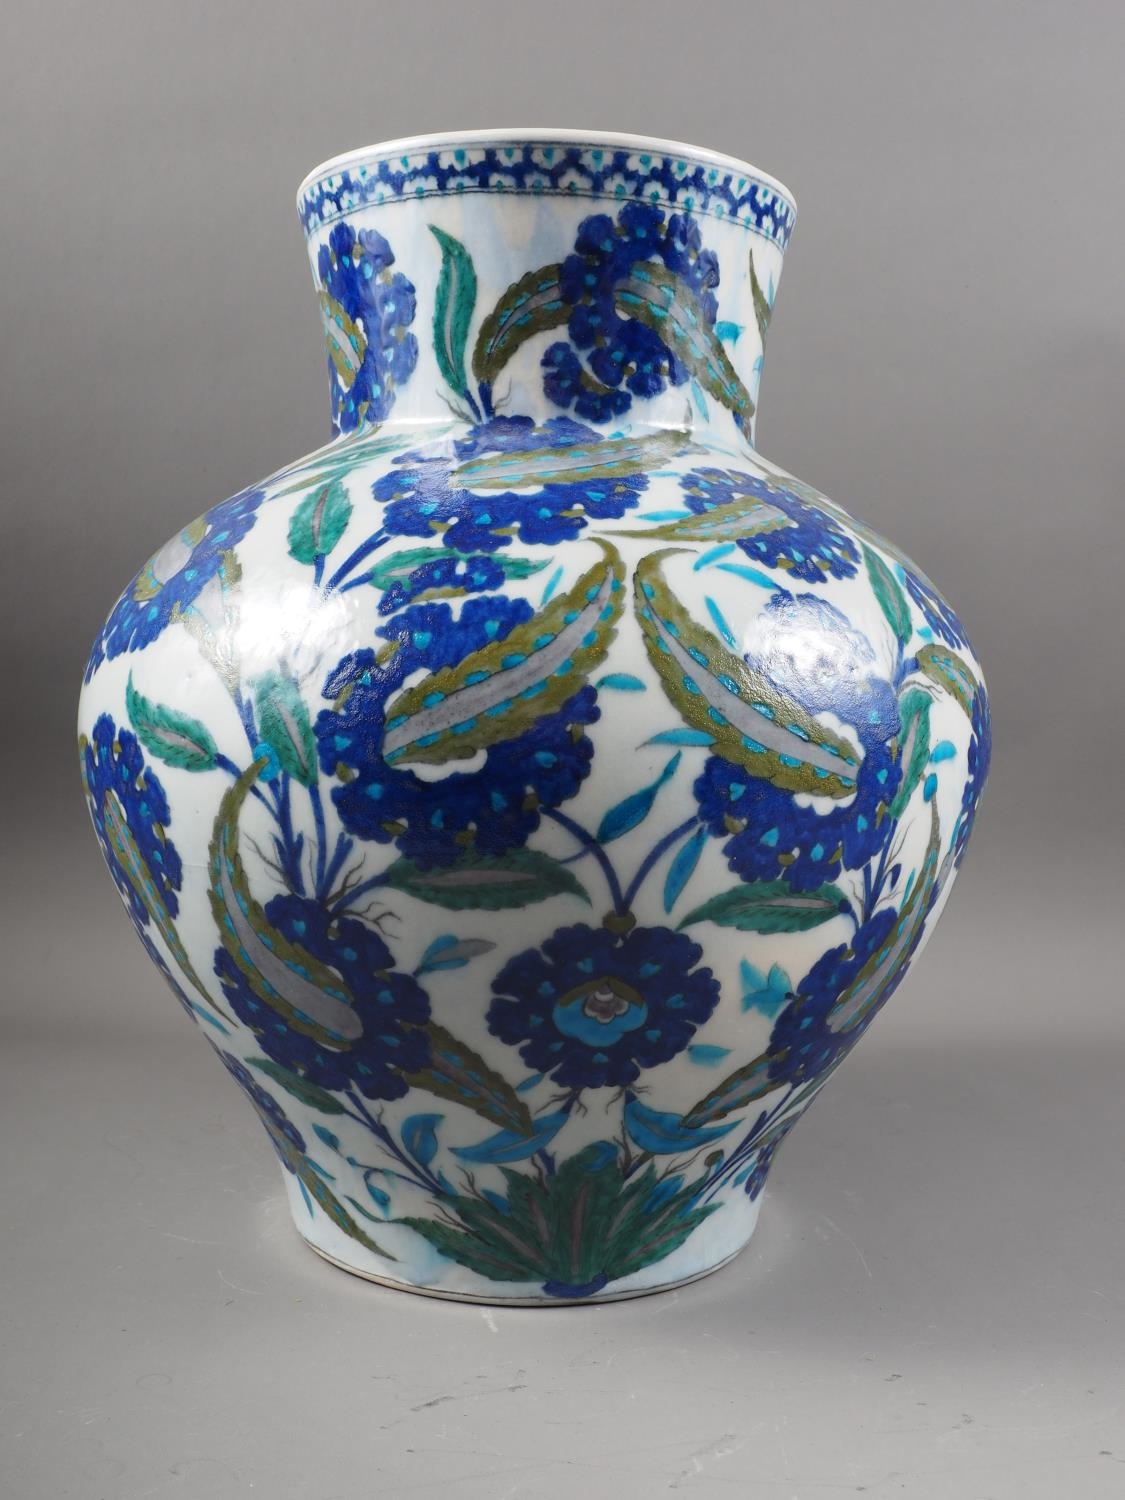 An Iznik bulbous vase of traditional floral design in shades of blue, 15" high